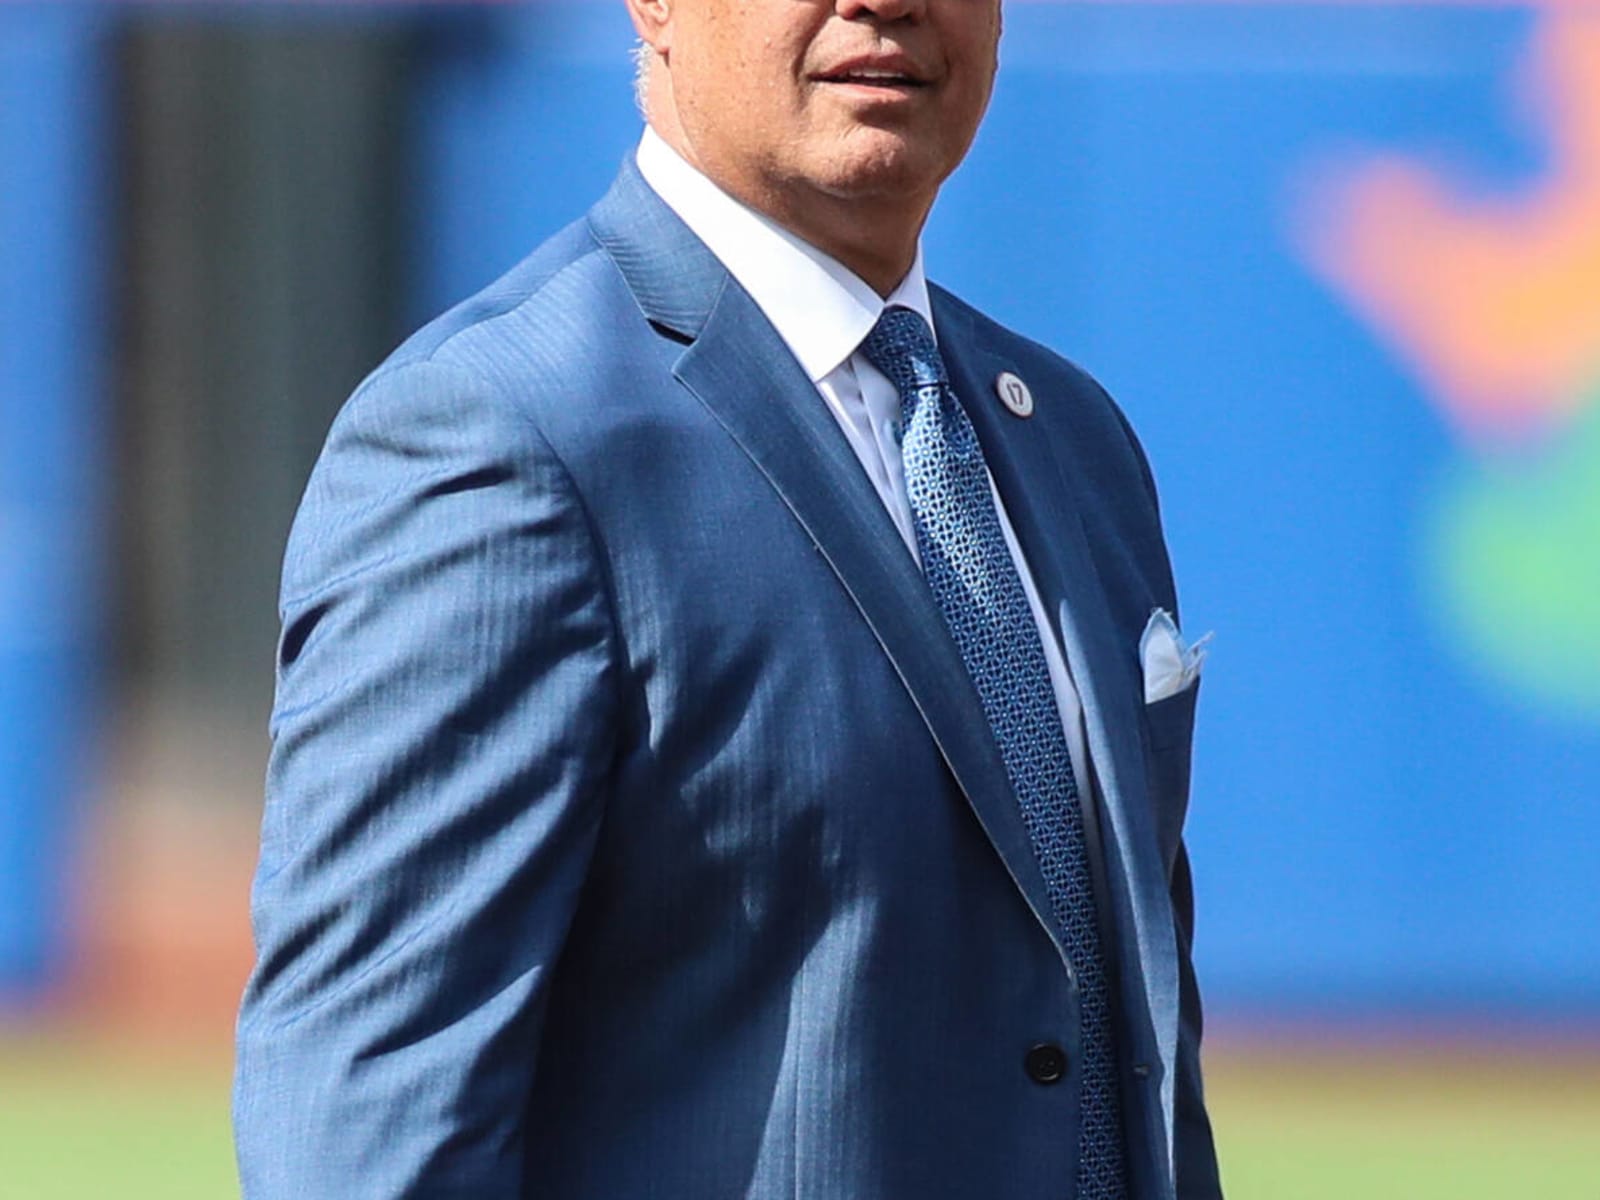 Ron Darling: 'Payment is due' for Mets players being hit by pitches